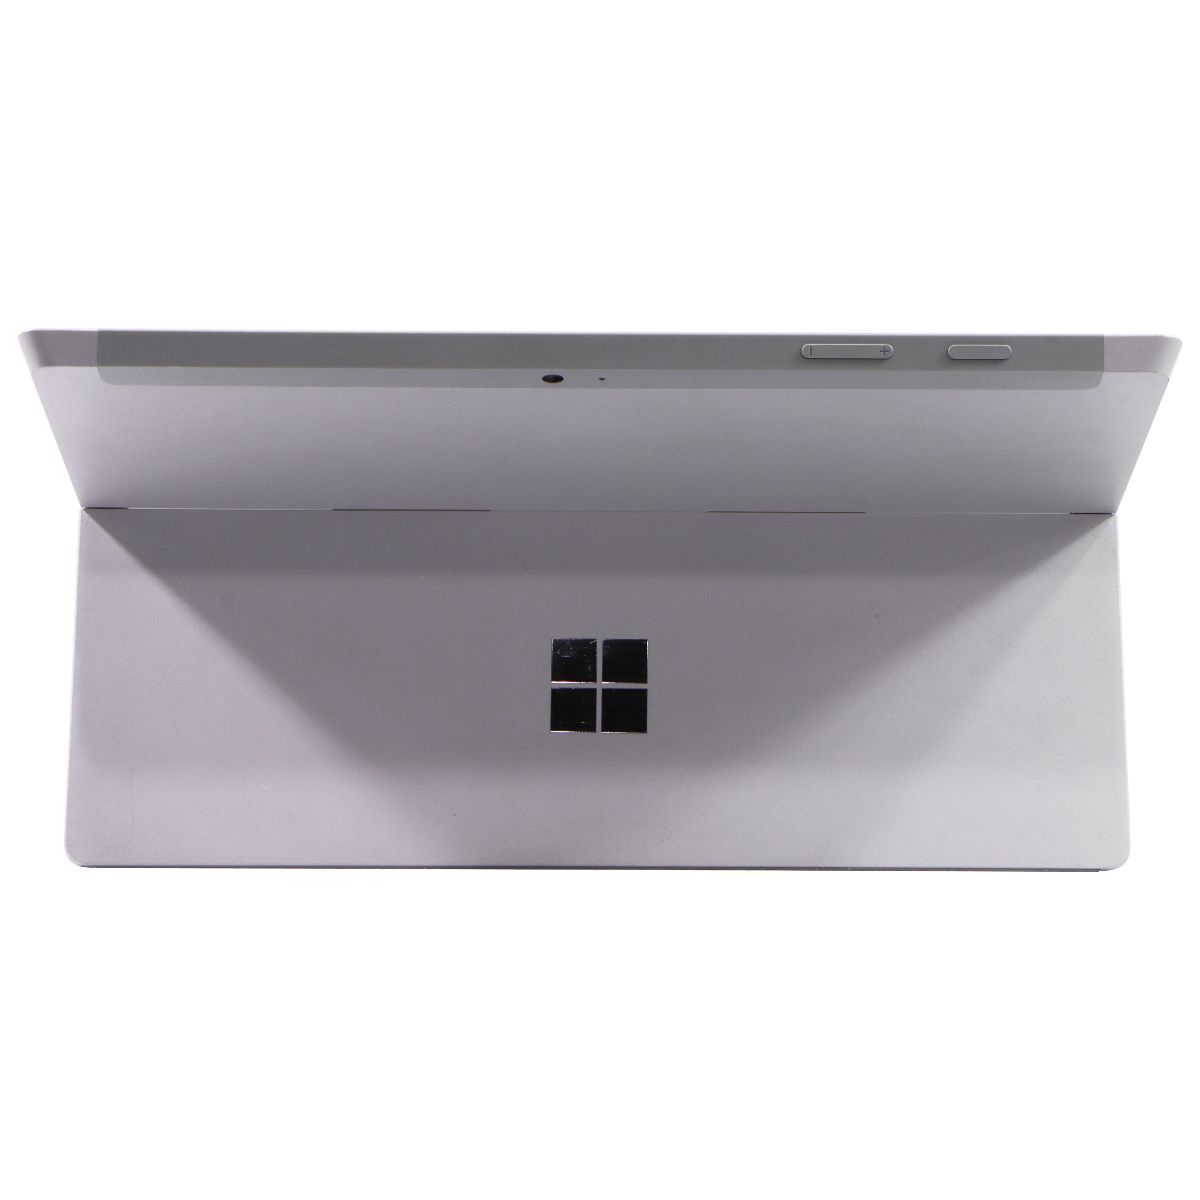 Microsoft Surface 3 (10.8-in) 1657 (Wifi + AT&T) Intel x7-Z8700/64GB/4GB/10 Home iPads, Tablets & eBook Readers Microsoft    - Simple Cell Bulk Wholesale Pricing - USA Seller